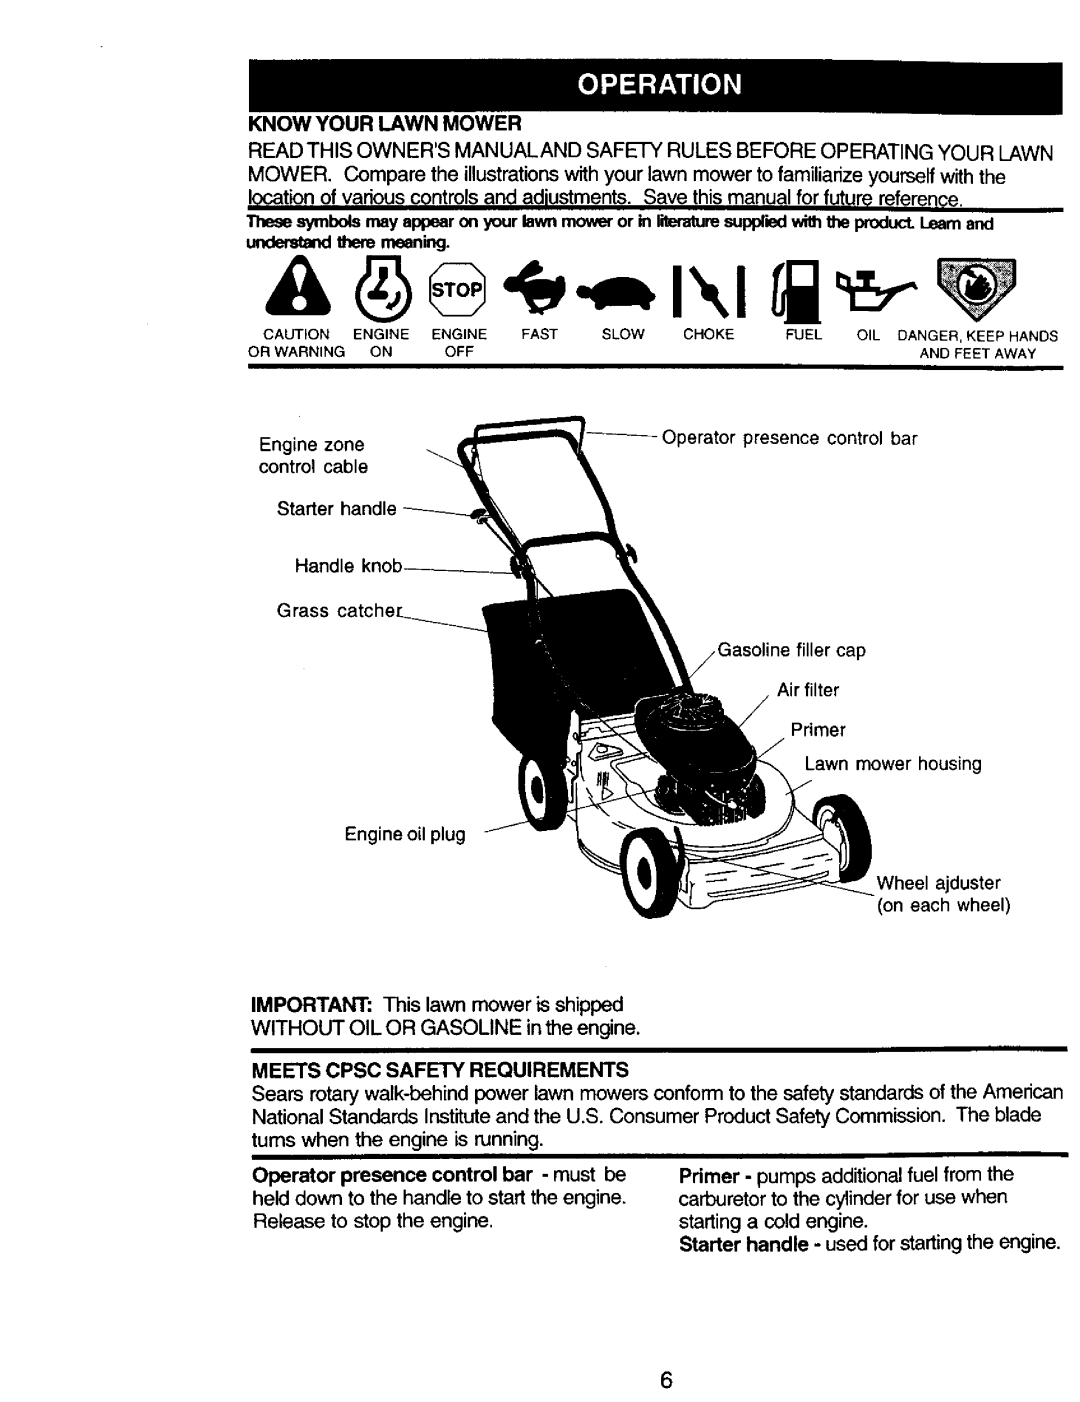 Craftsman 917.387258 Know Your Lawn Mower, IMPORTANT This lawn mower is shipped, Meets Cpsc Safety Requirements 